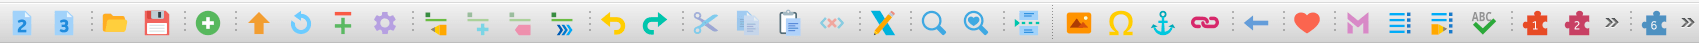 Image of the primary toolbar.